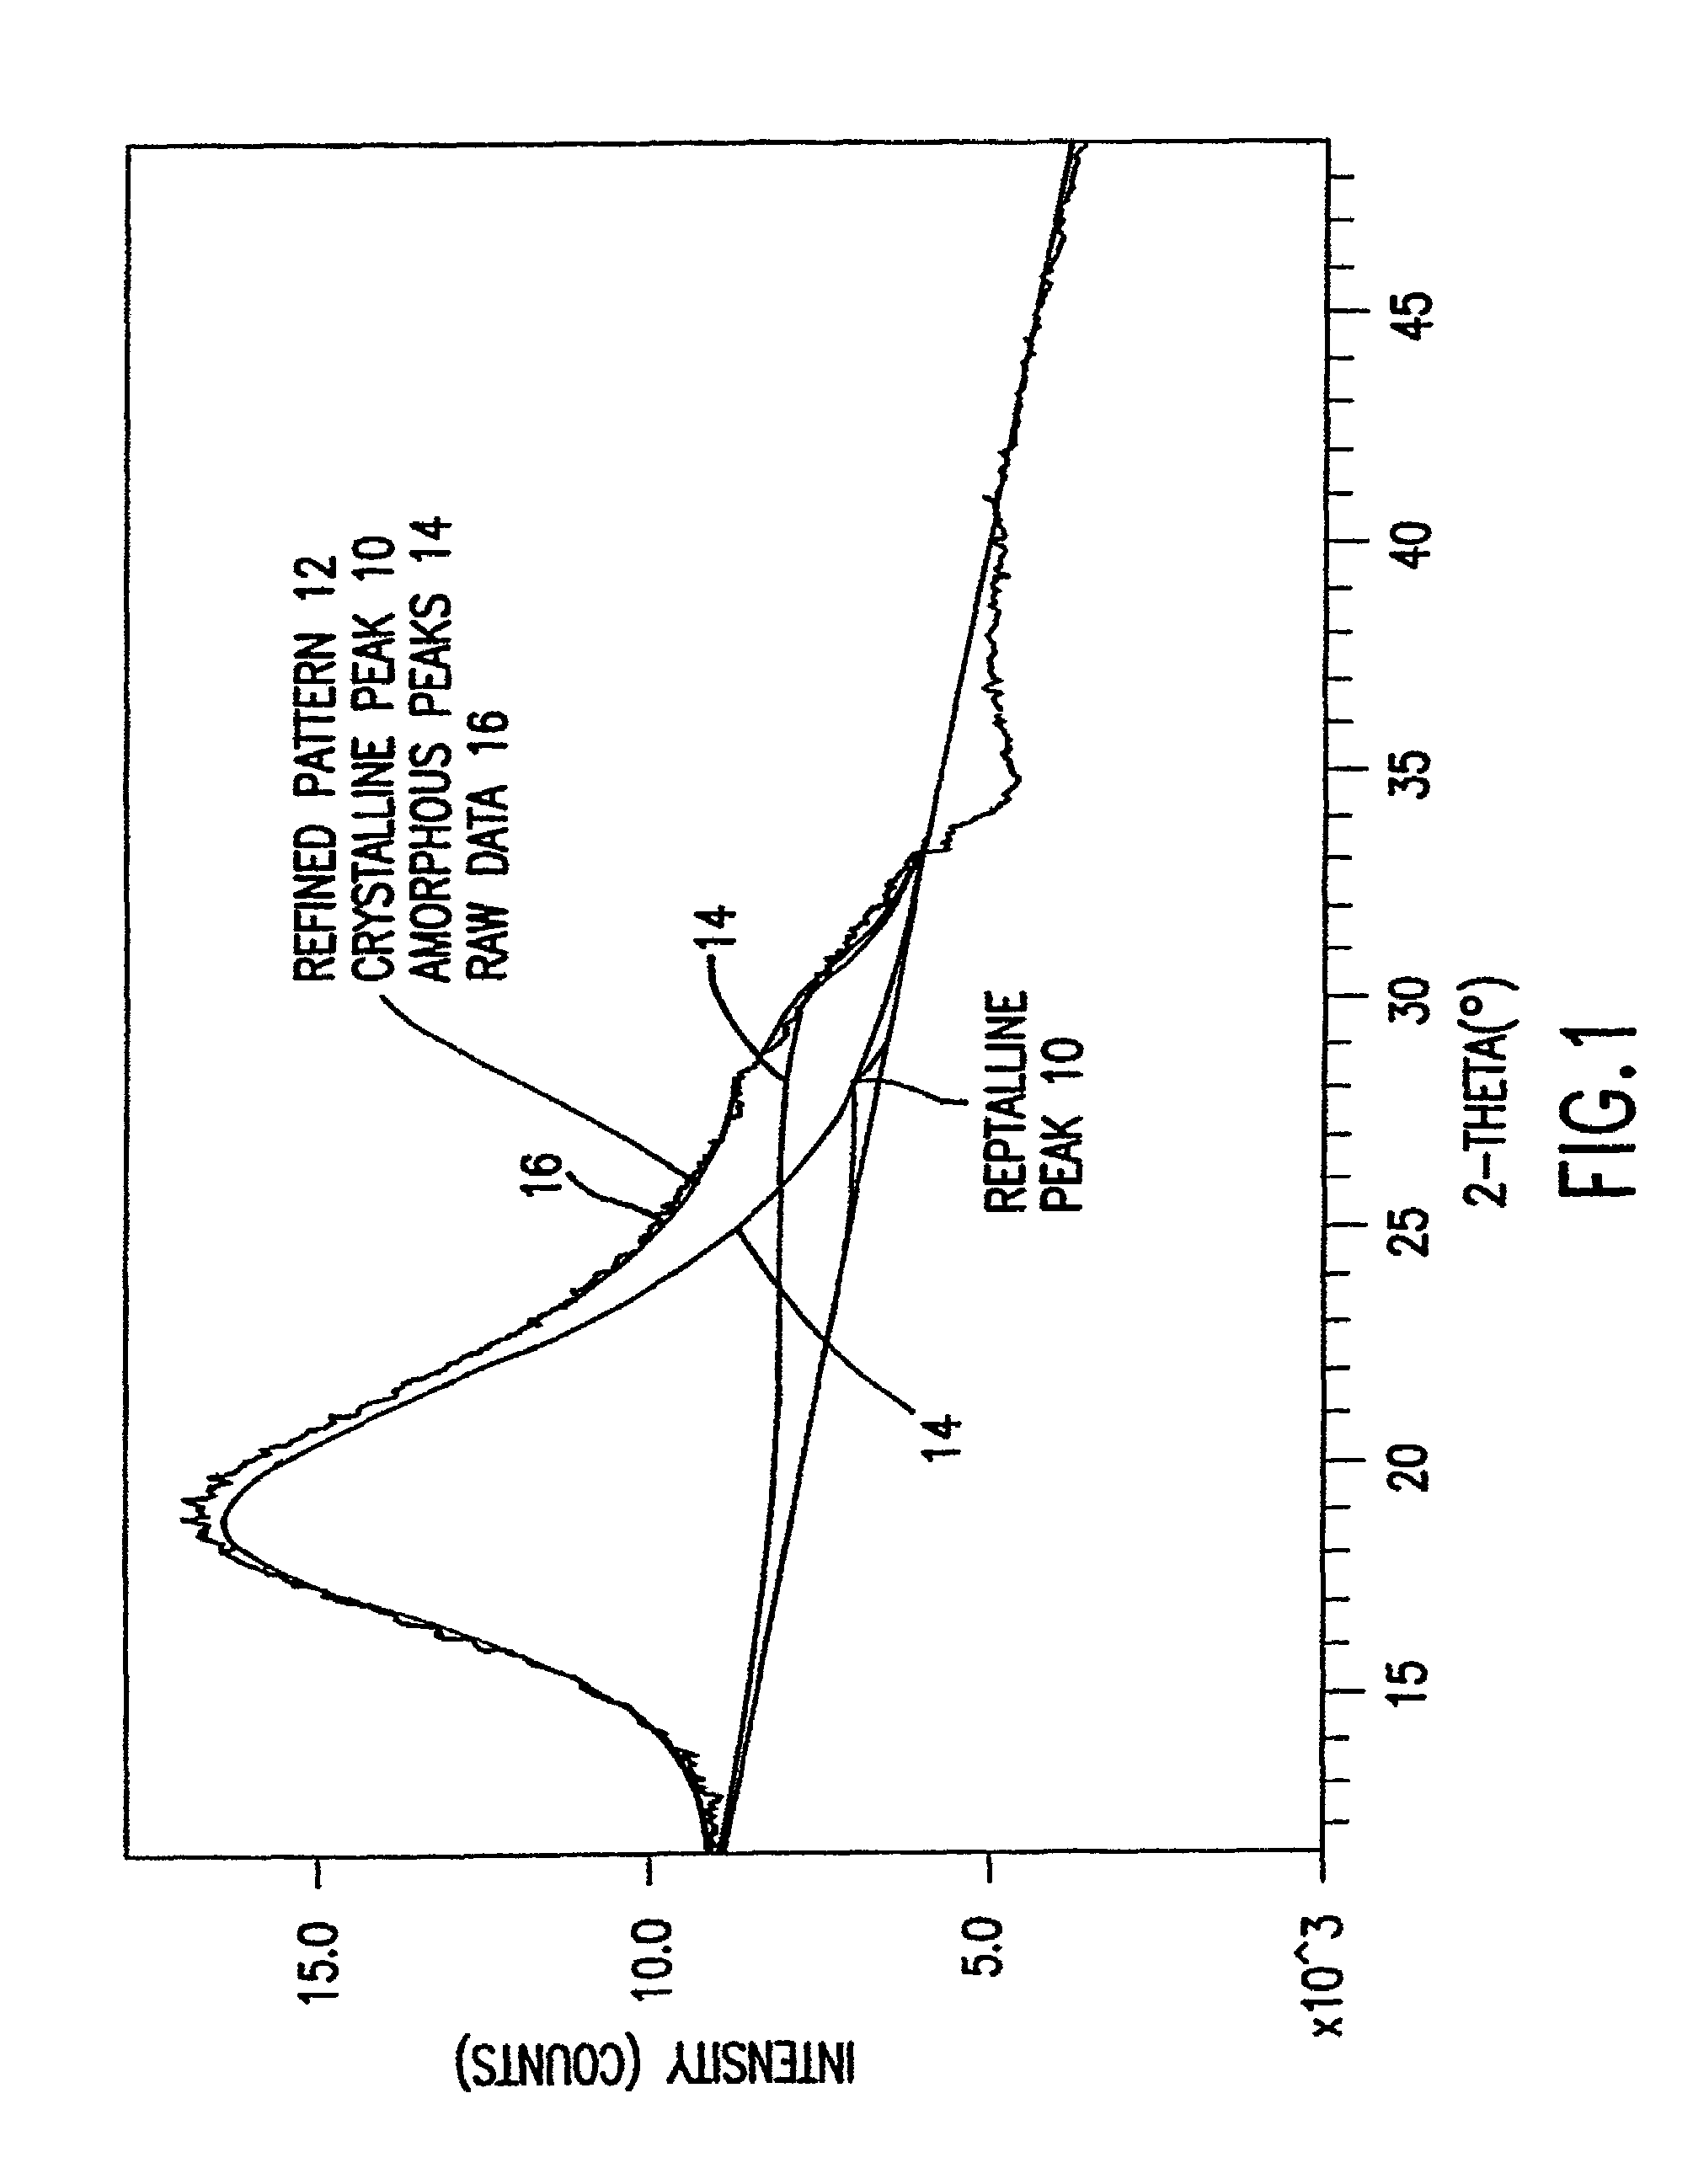 Method for the preparation of non-blocking adhesive coated articles and cold seal bonded laminates